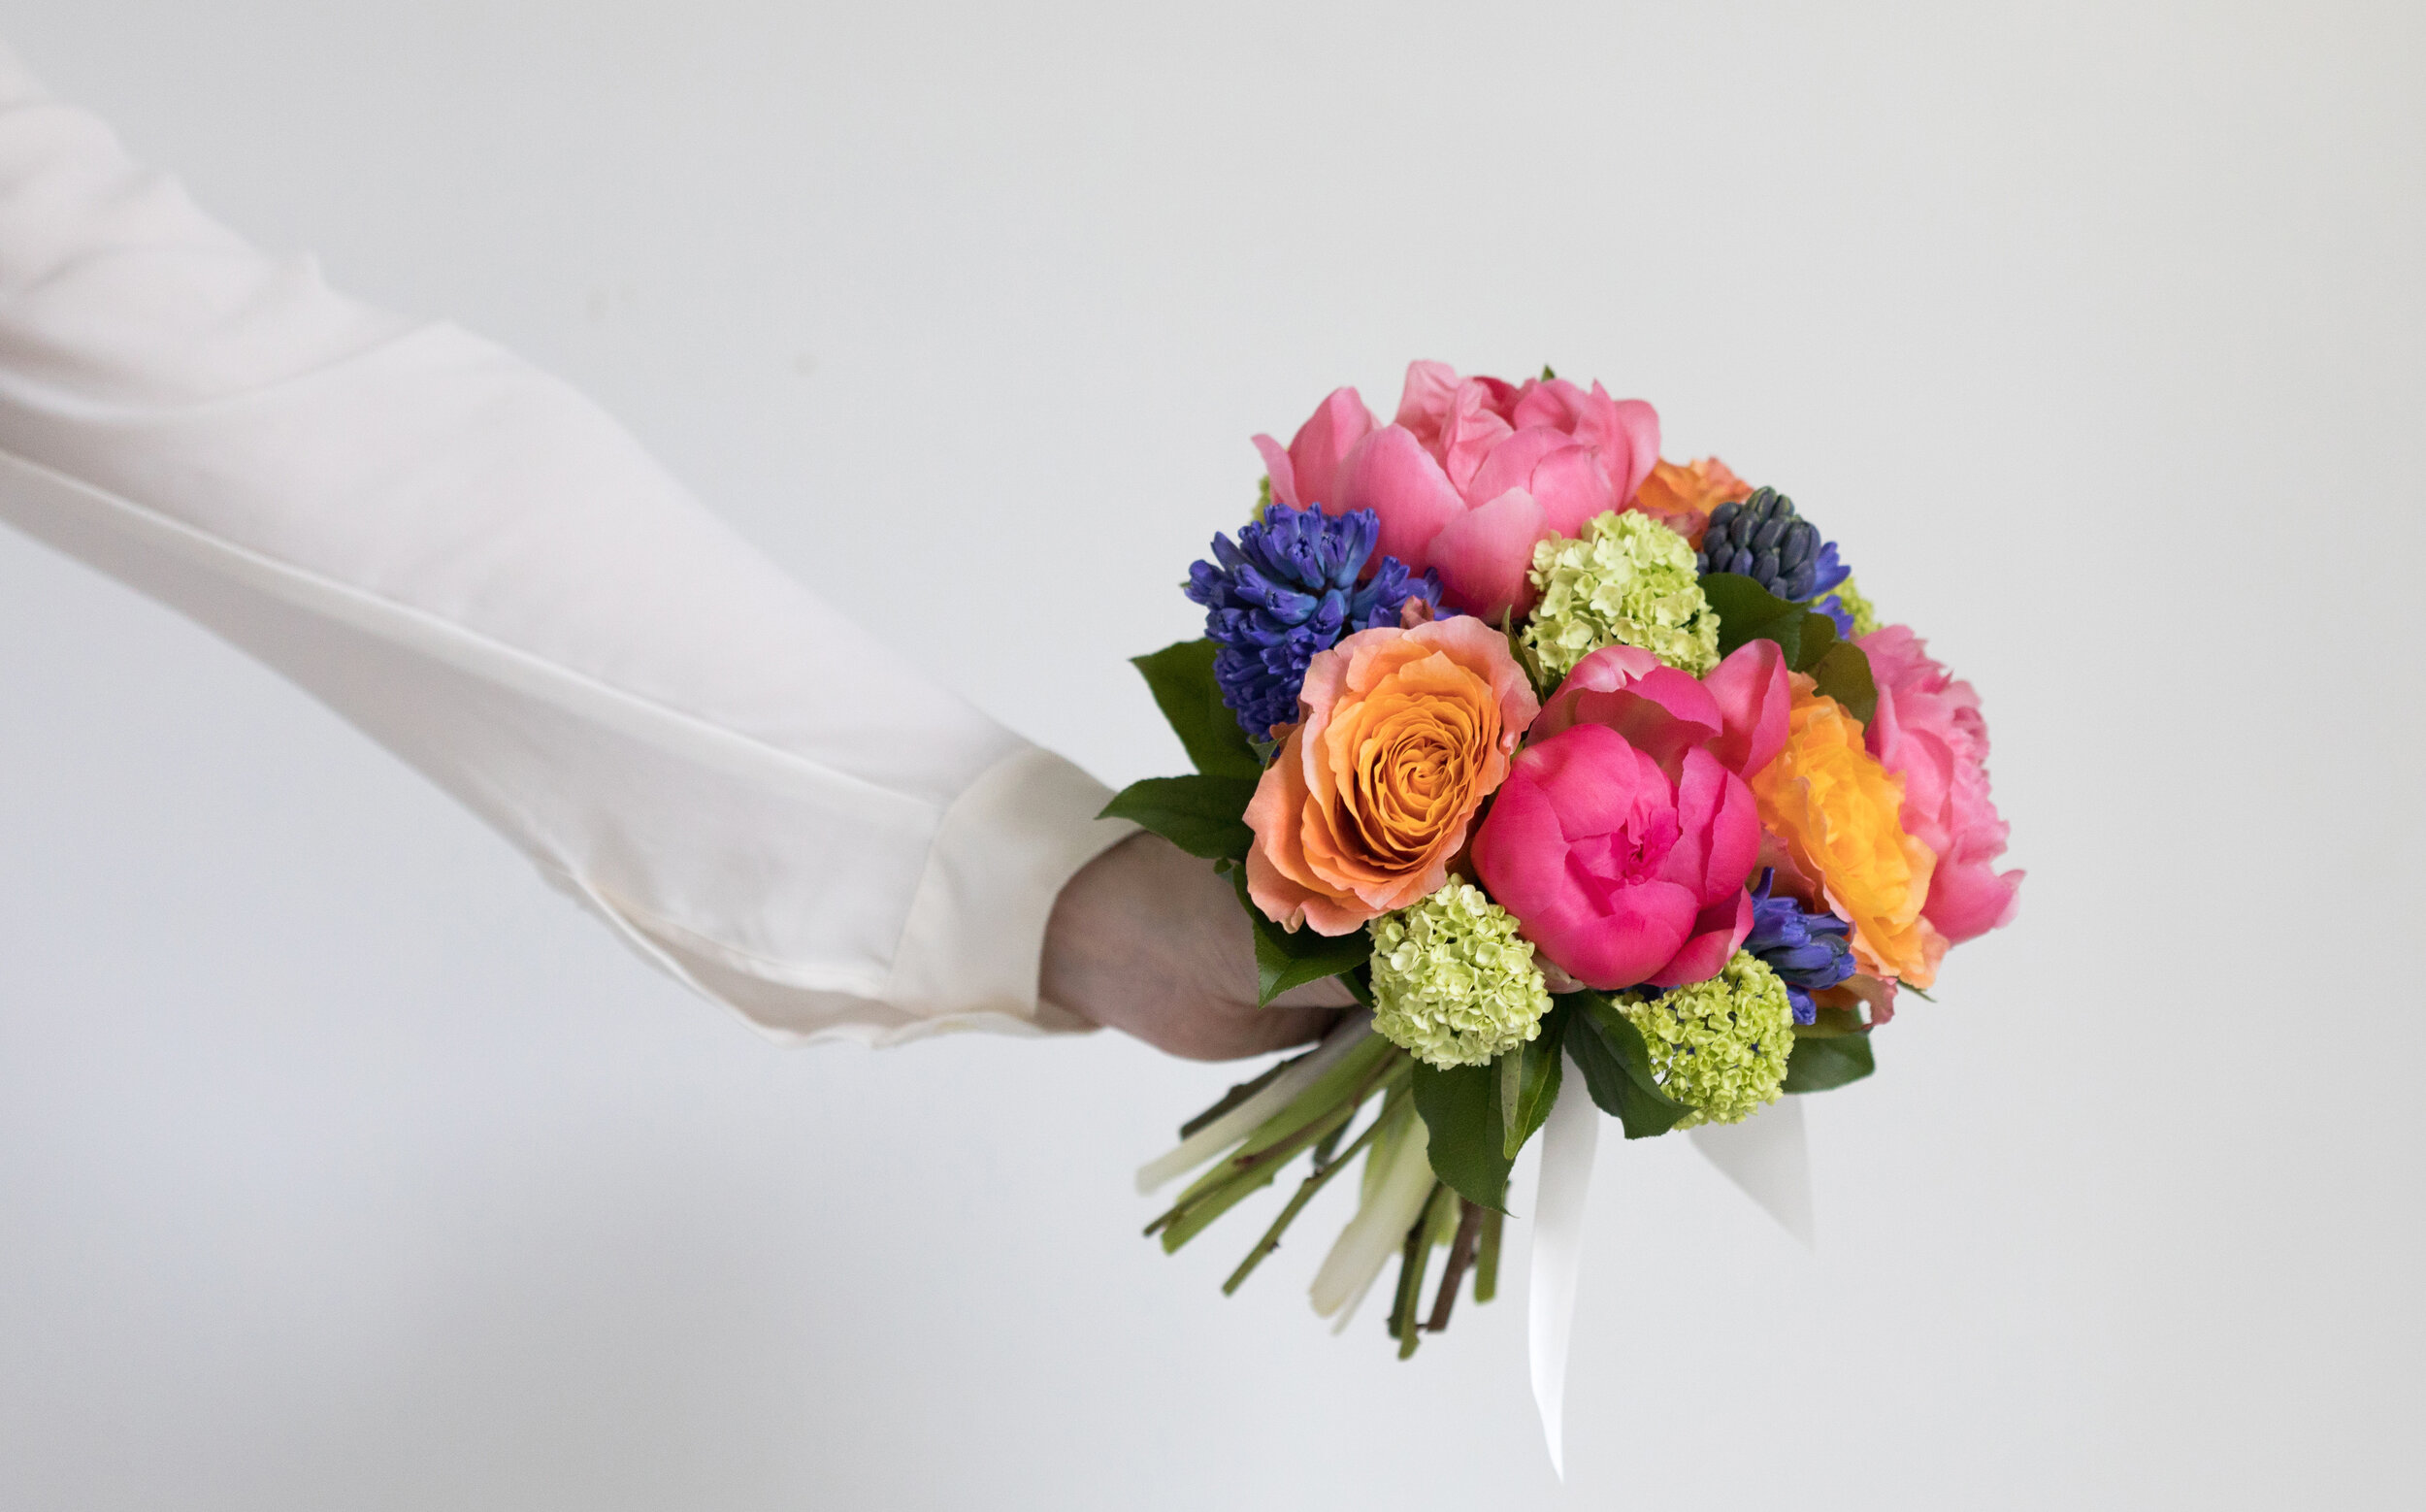 Vancouver Flower shop offering flower delivery. A florist providing  Vancouver with flowers for all occasions including delivery.